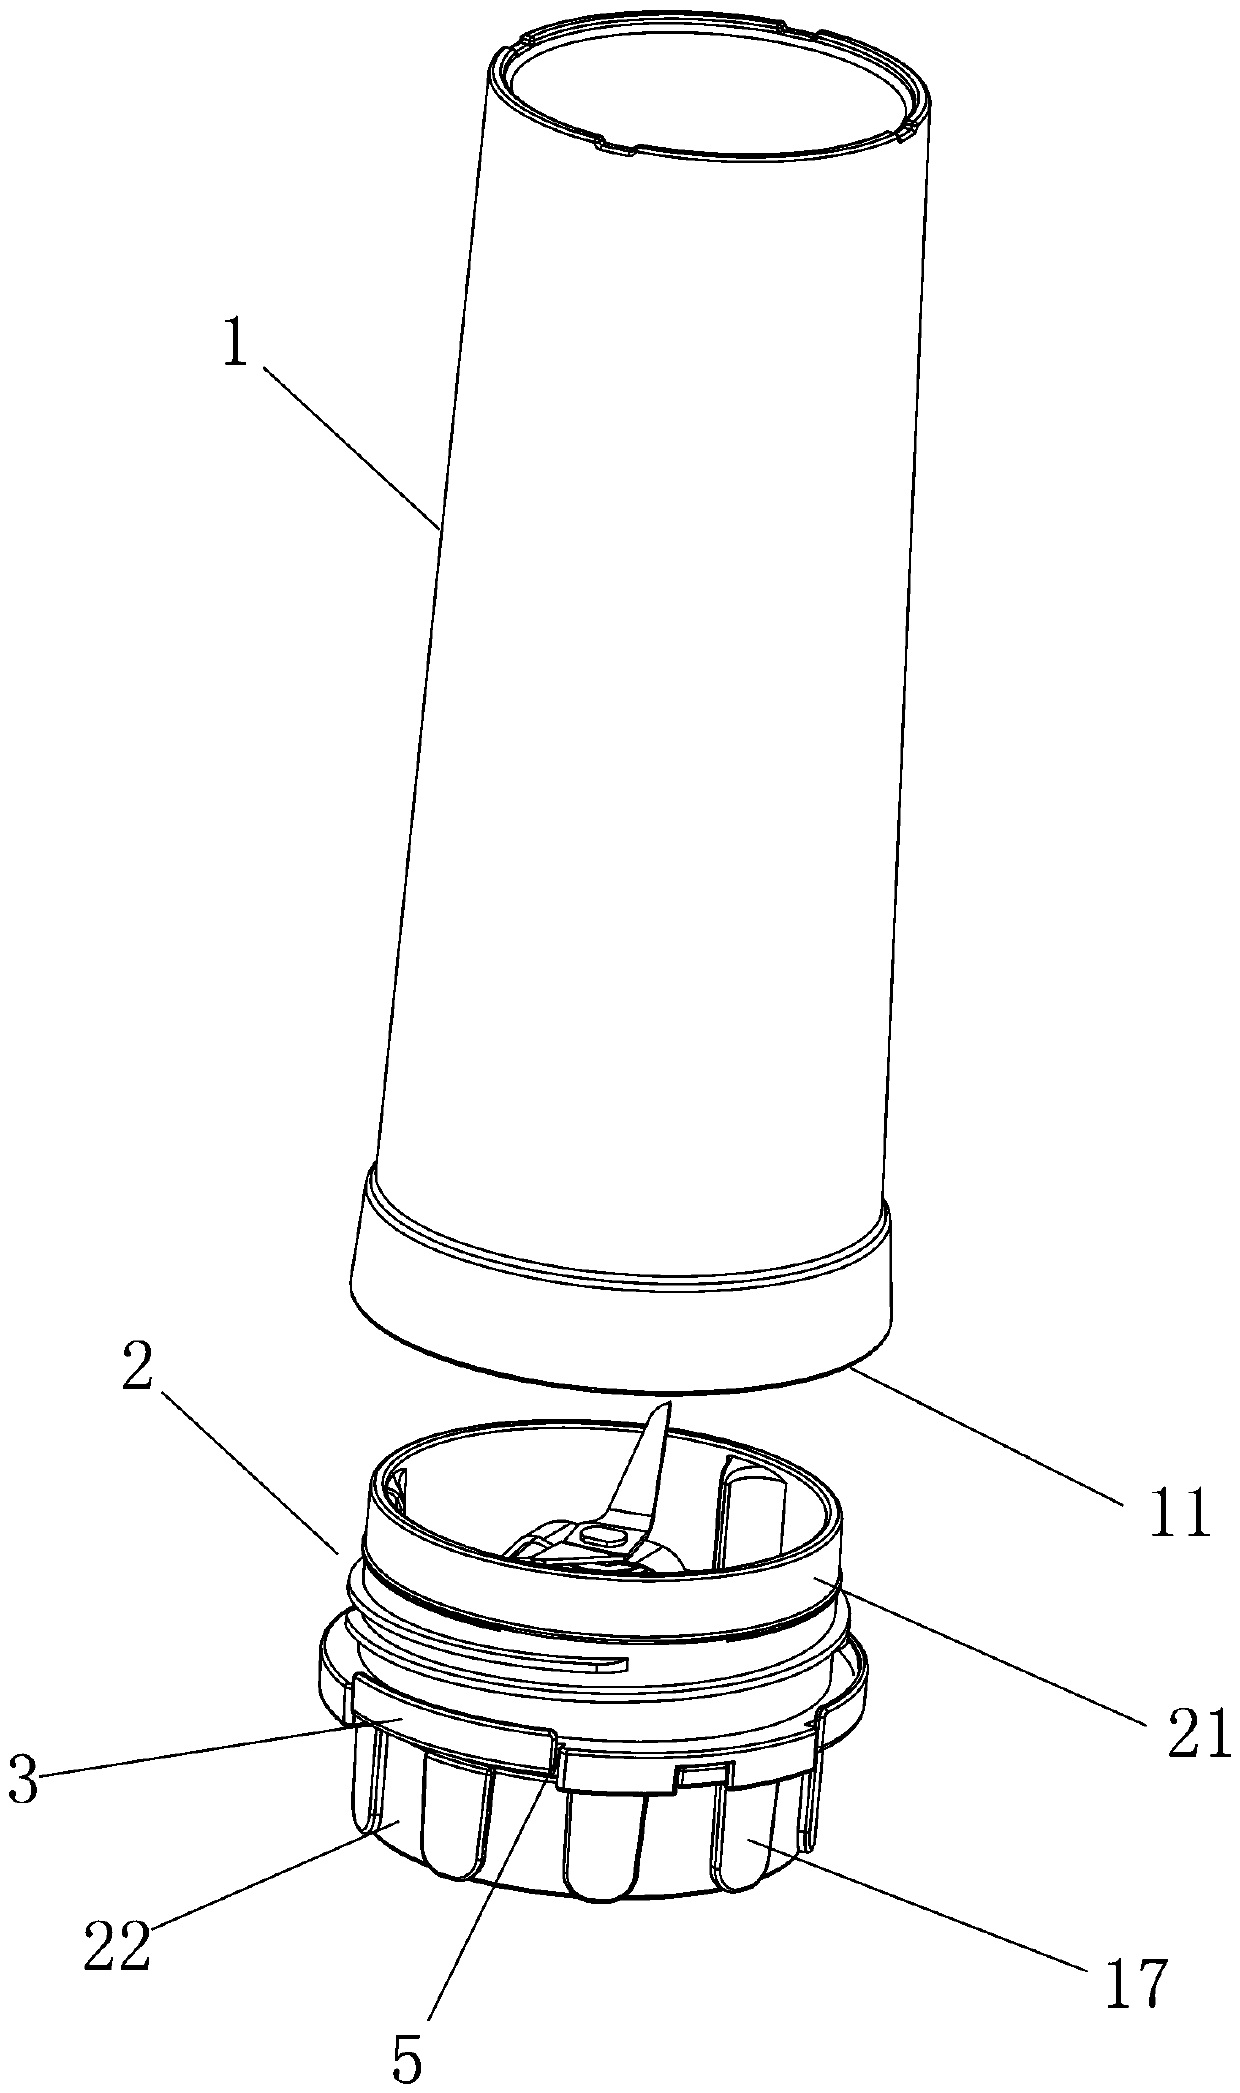 Food processor cup body and mounting seat connecting structure